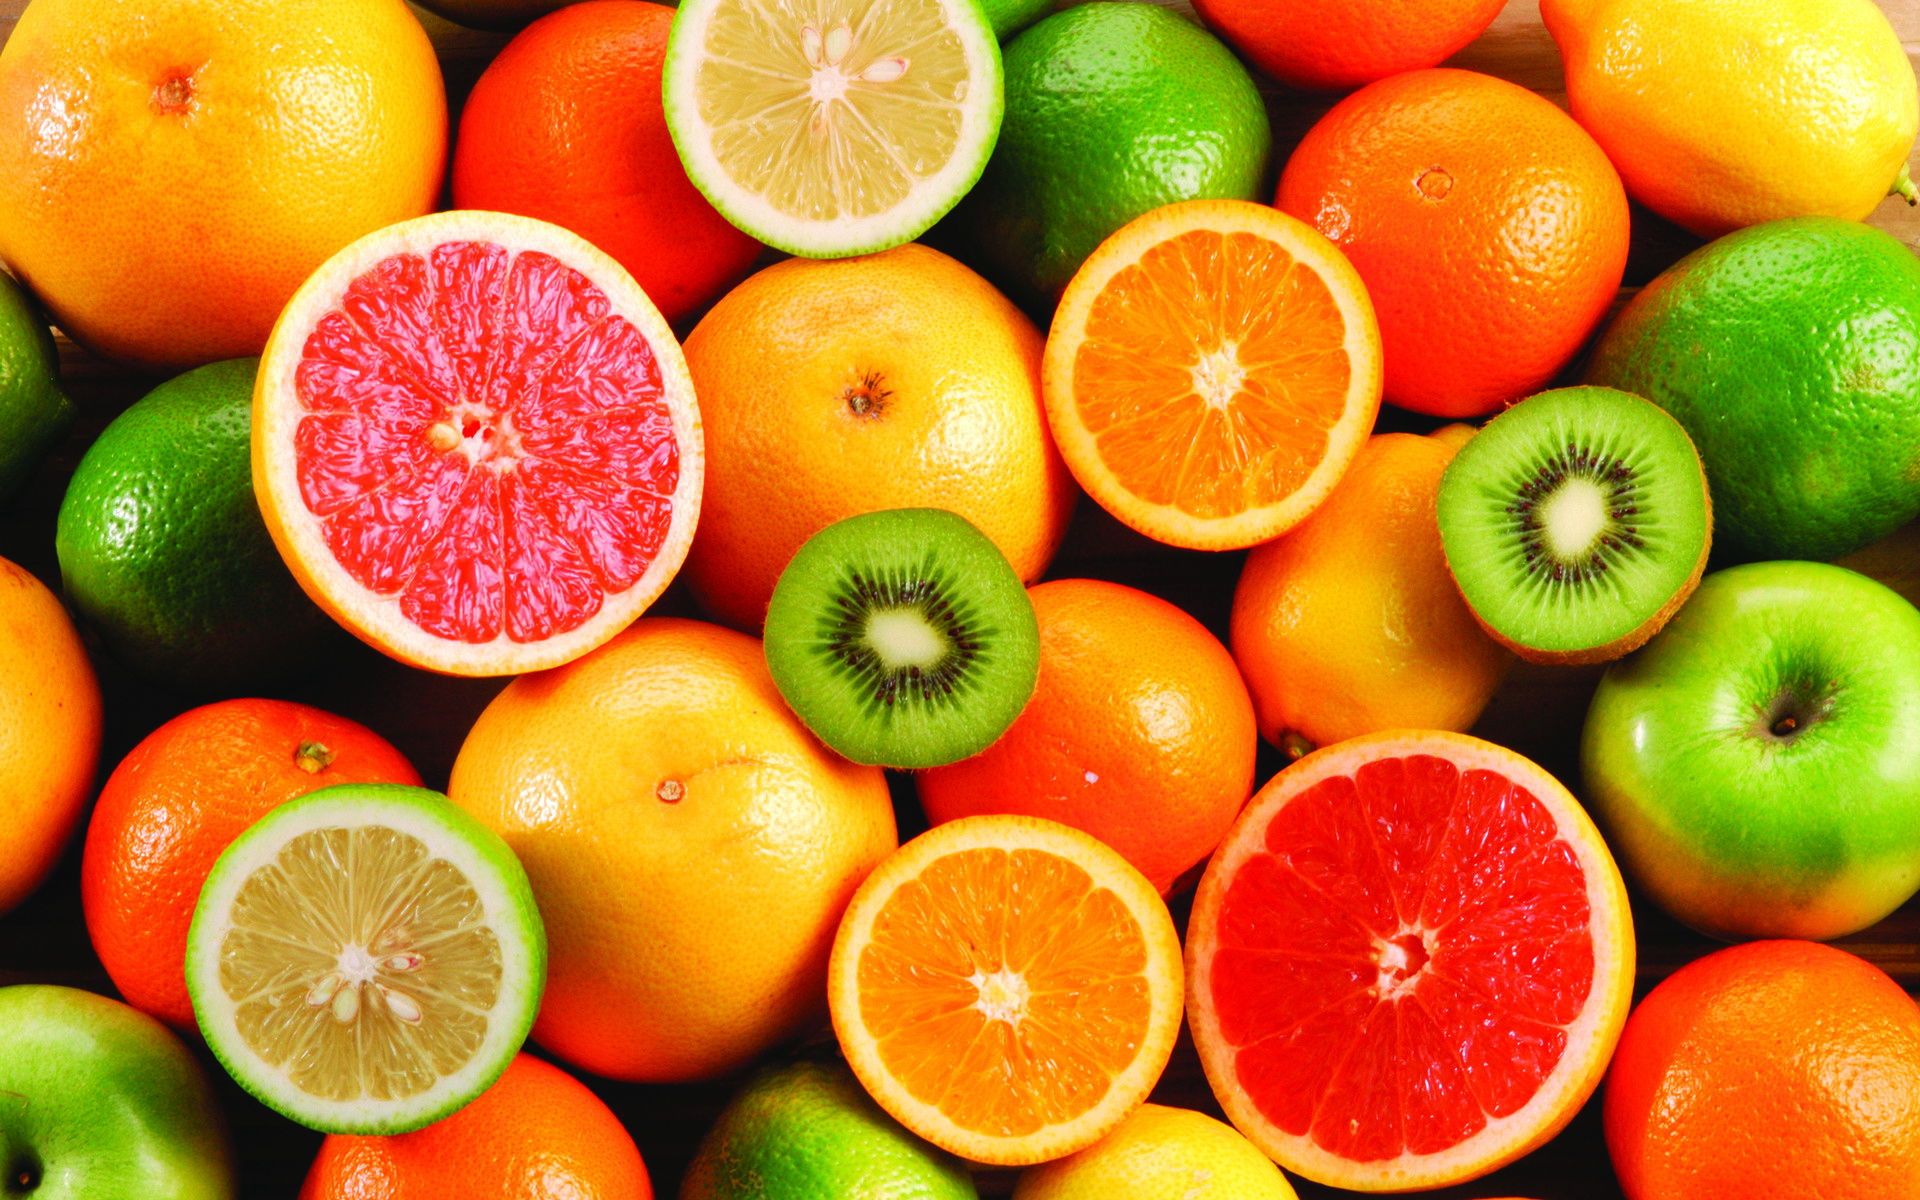 Download Fruits wallpapers for mobile phone free Fruits HD pictures